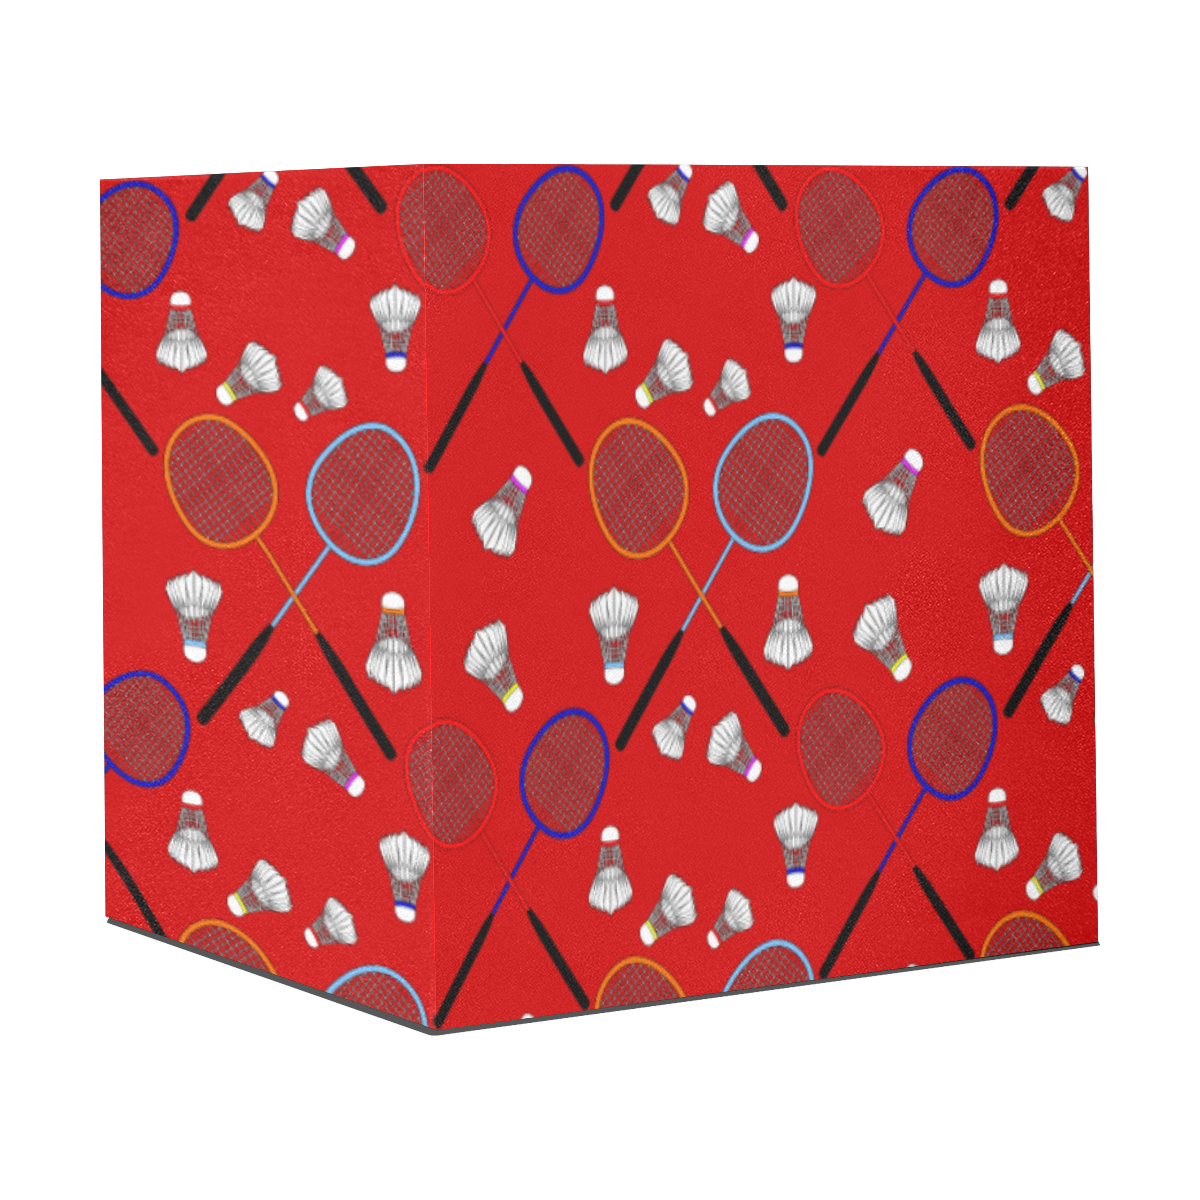 Badminton Rackets and Shuttlecocks Pattern Sports Red Gift Wrapping Paper 58"x 23" (5 Rolls)